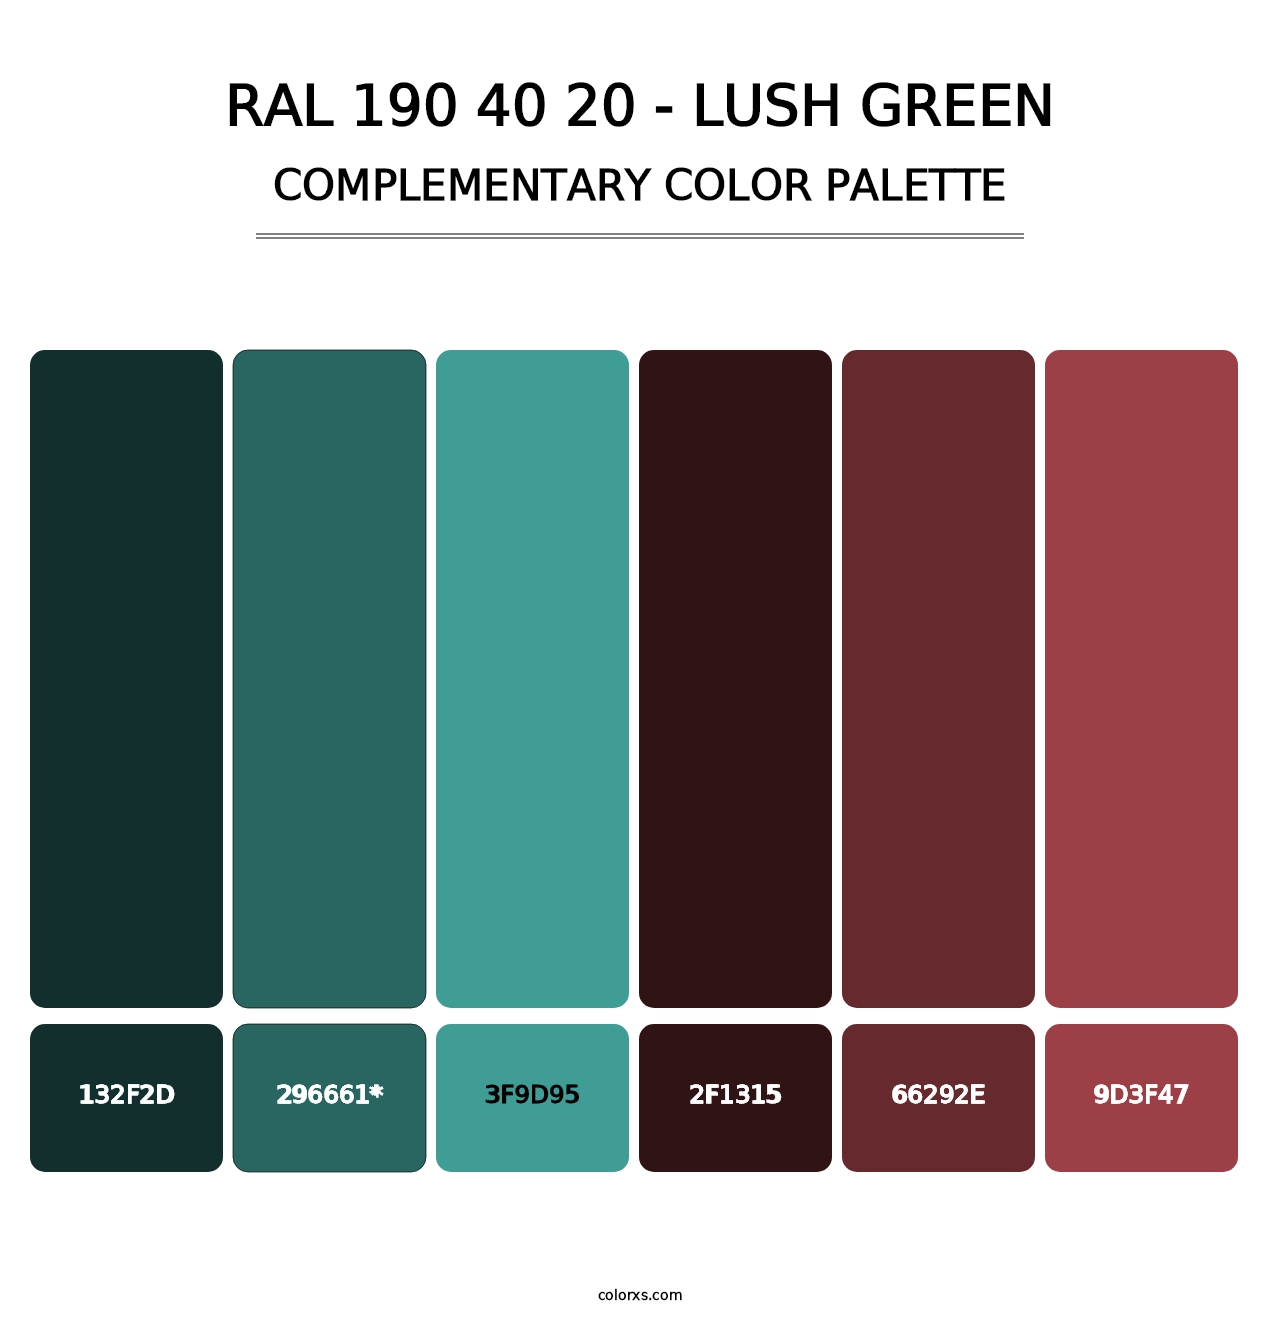 RAL 190 40 20 - Lush Green - Complementary Color Palette